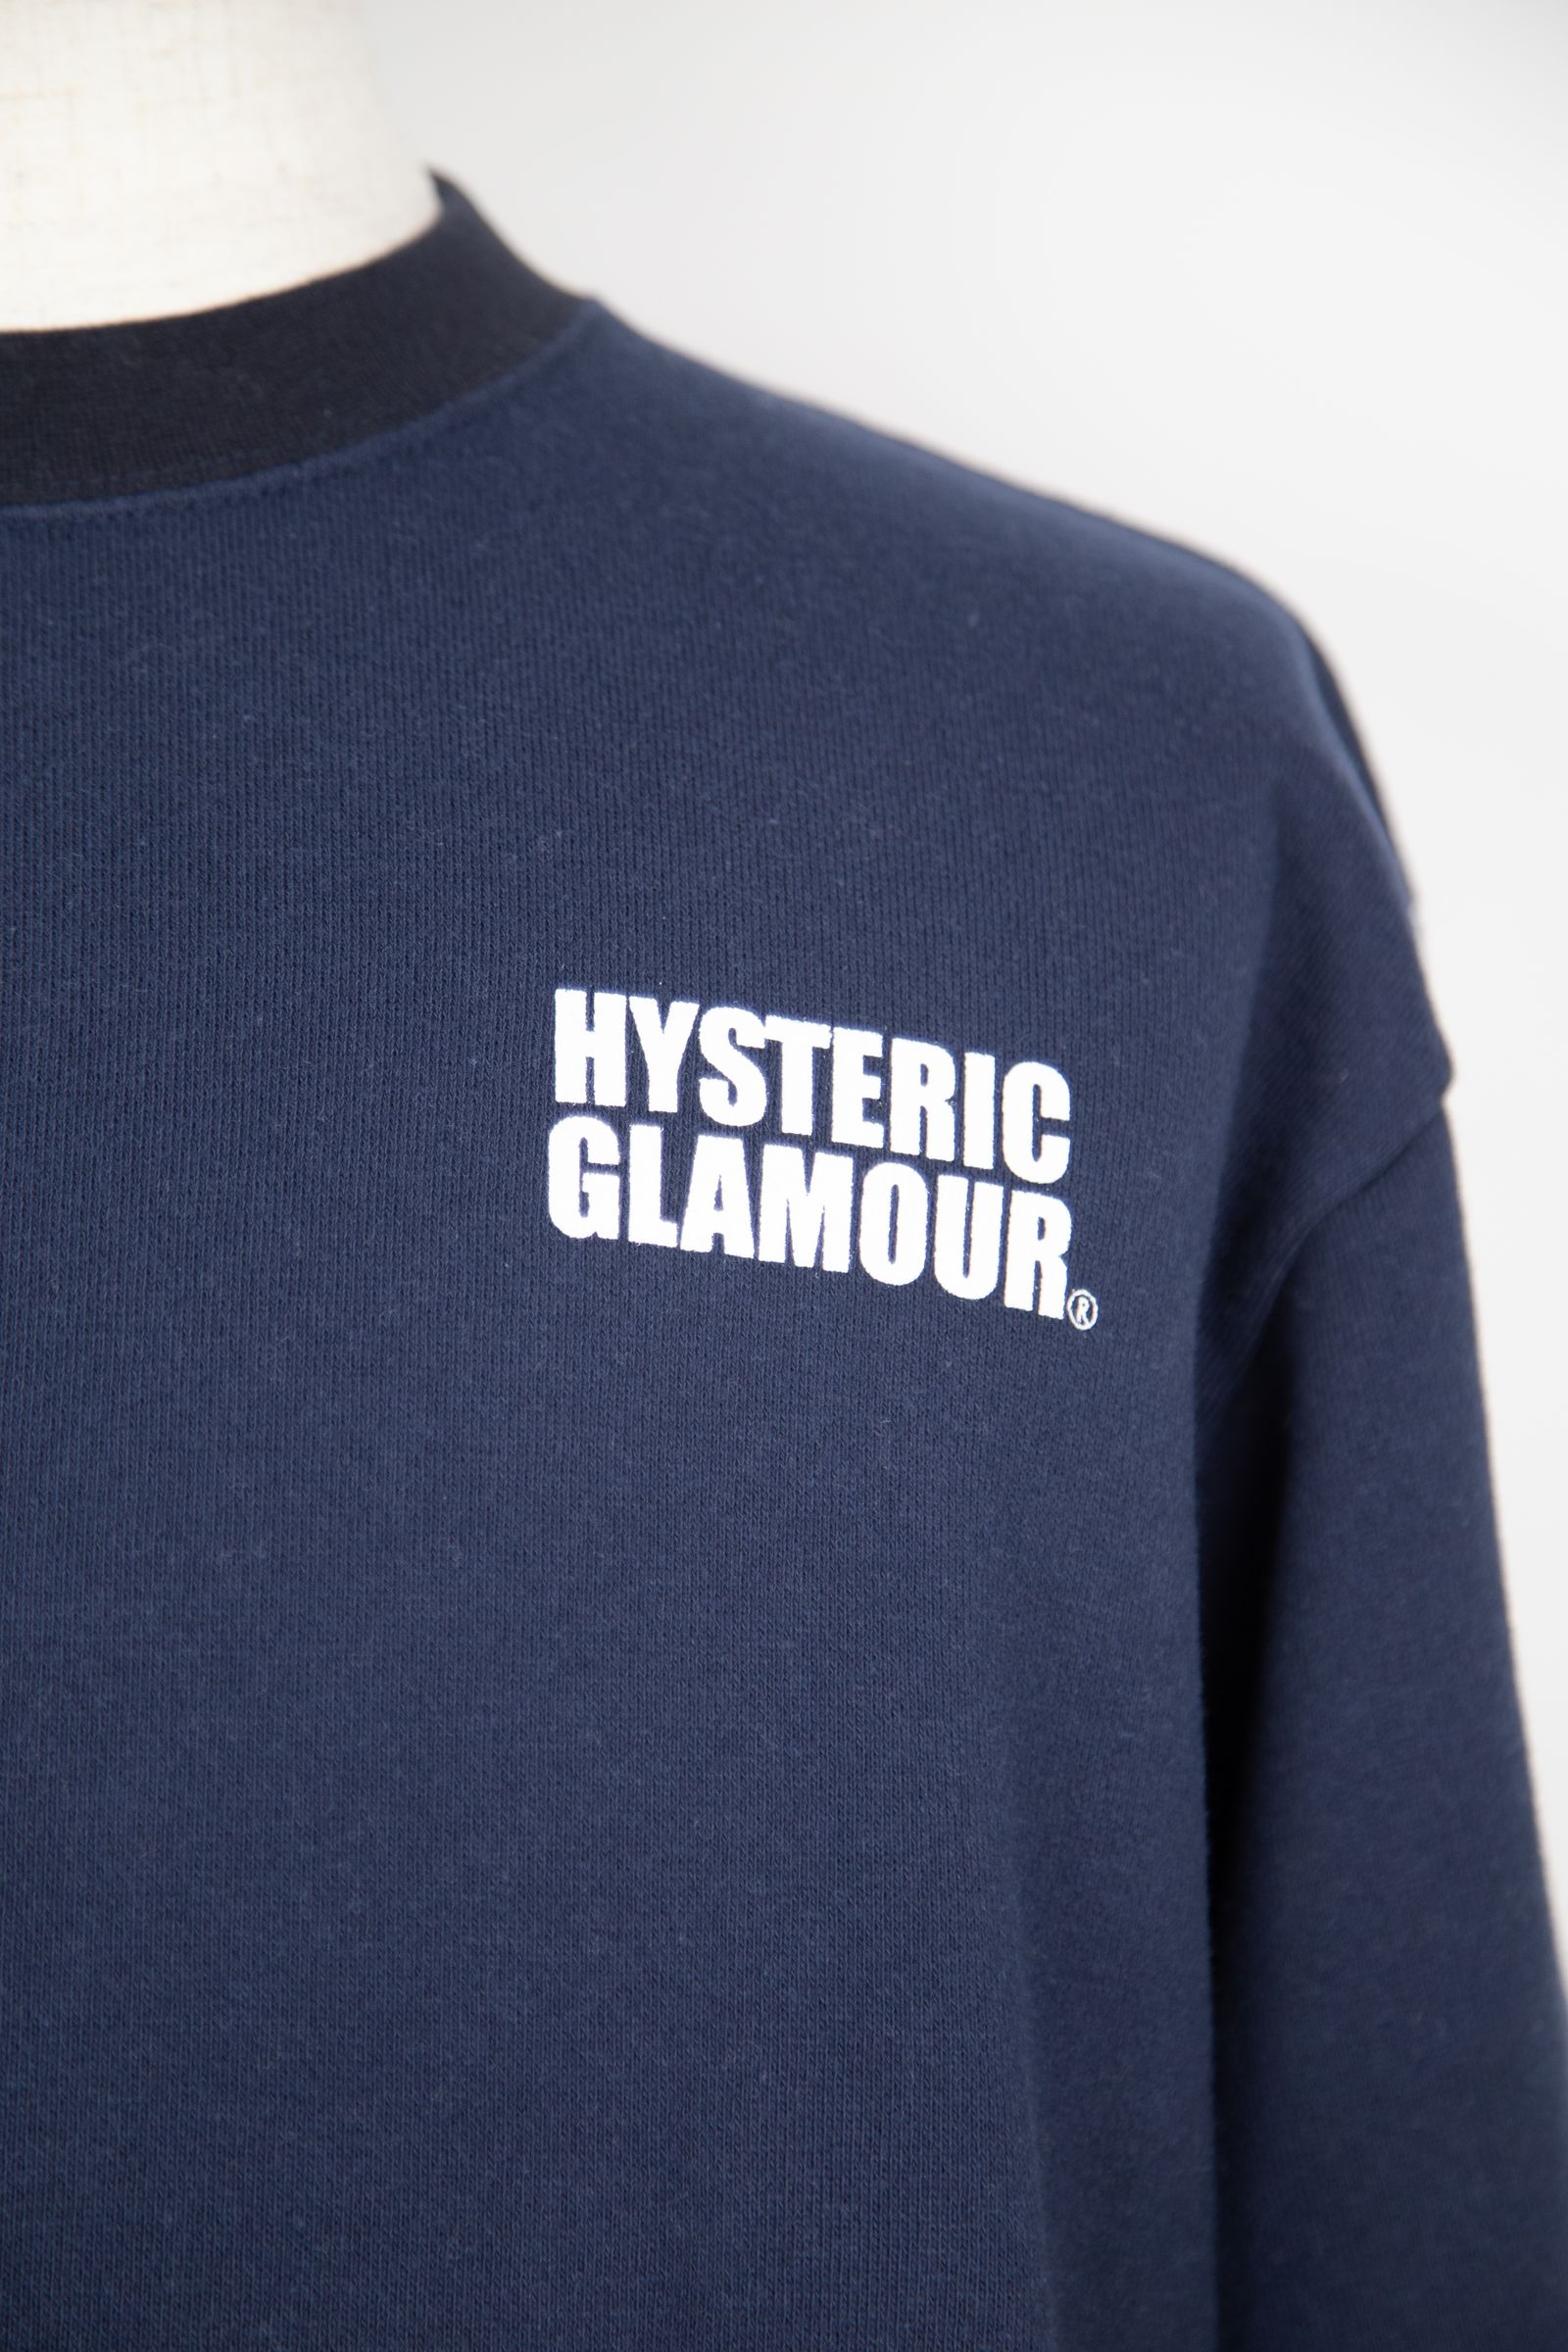 HYSTERIC GLAMOUR - SEE NO EVIL スウェット / ブラック | Tempt